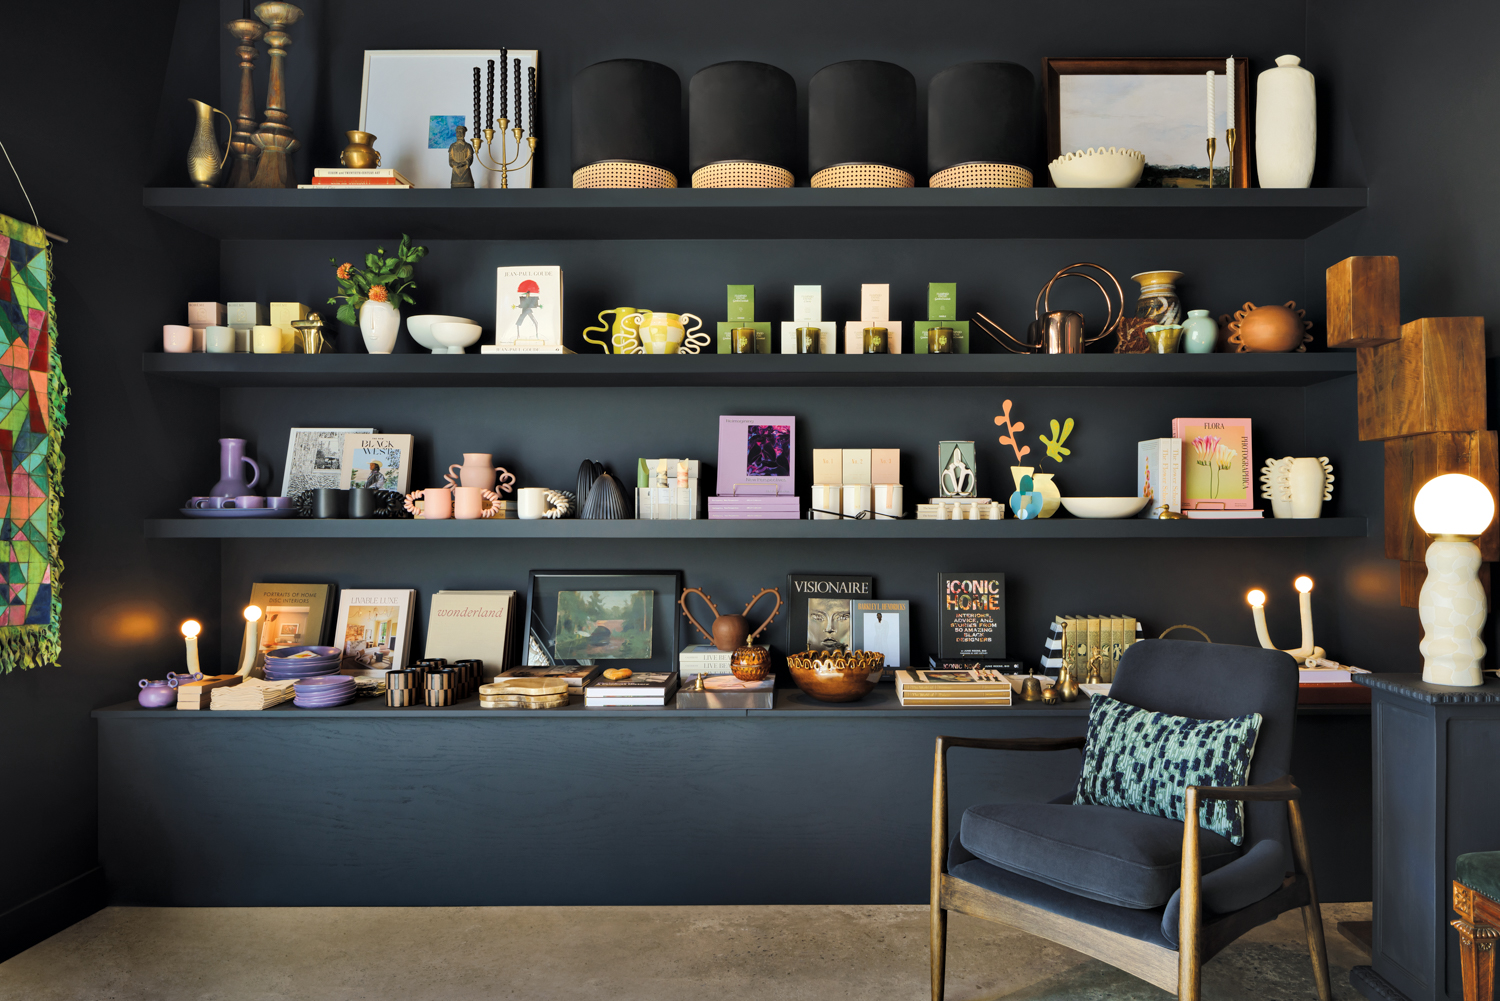 A variety of home decor goods on display on a black wall with floating black shelves.